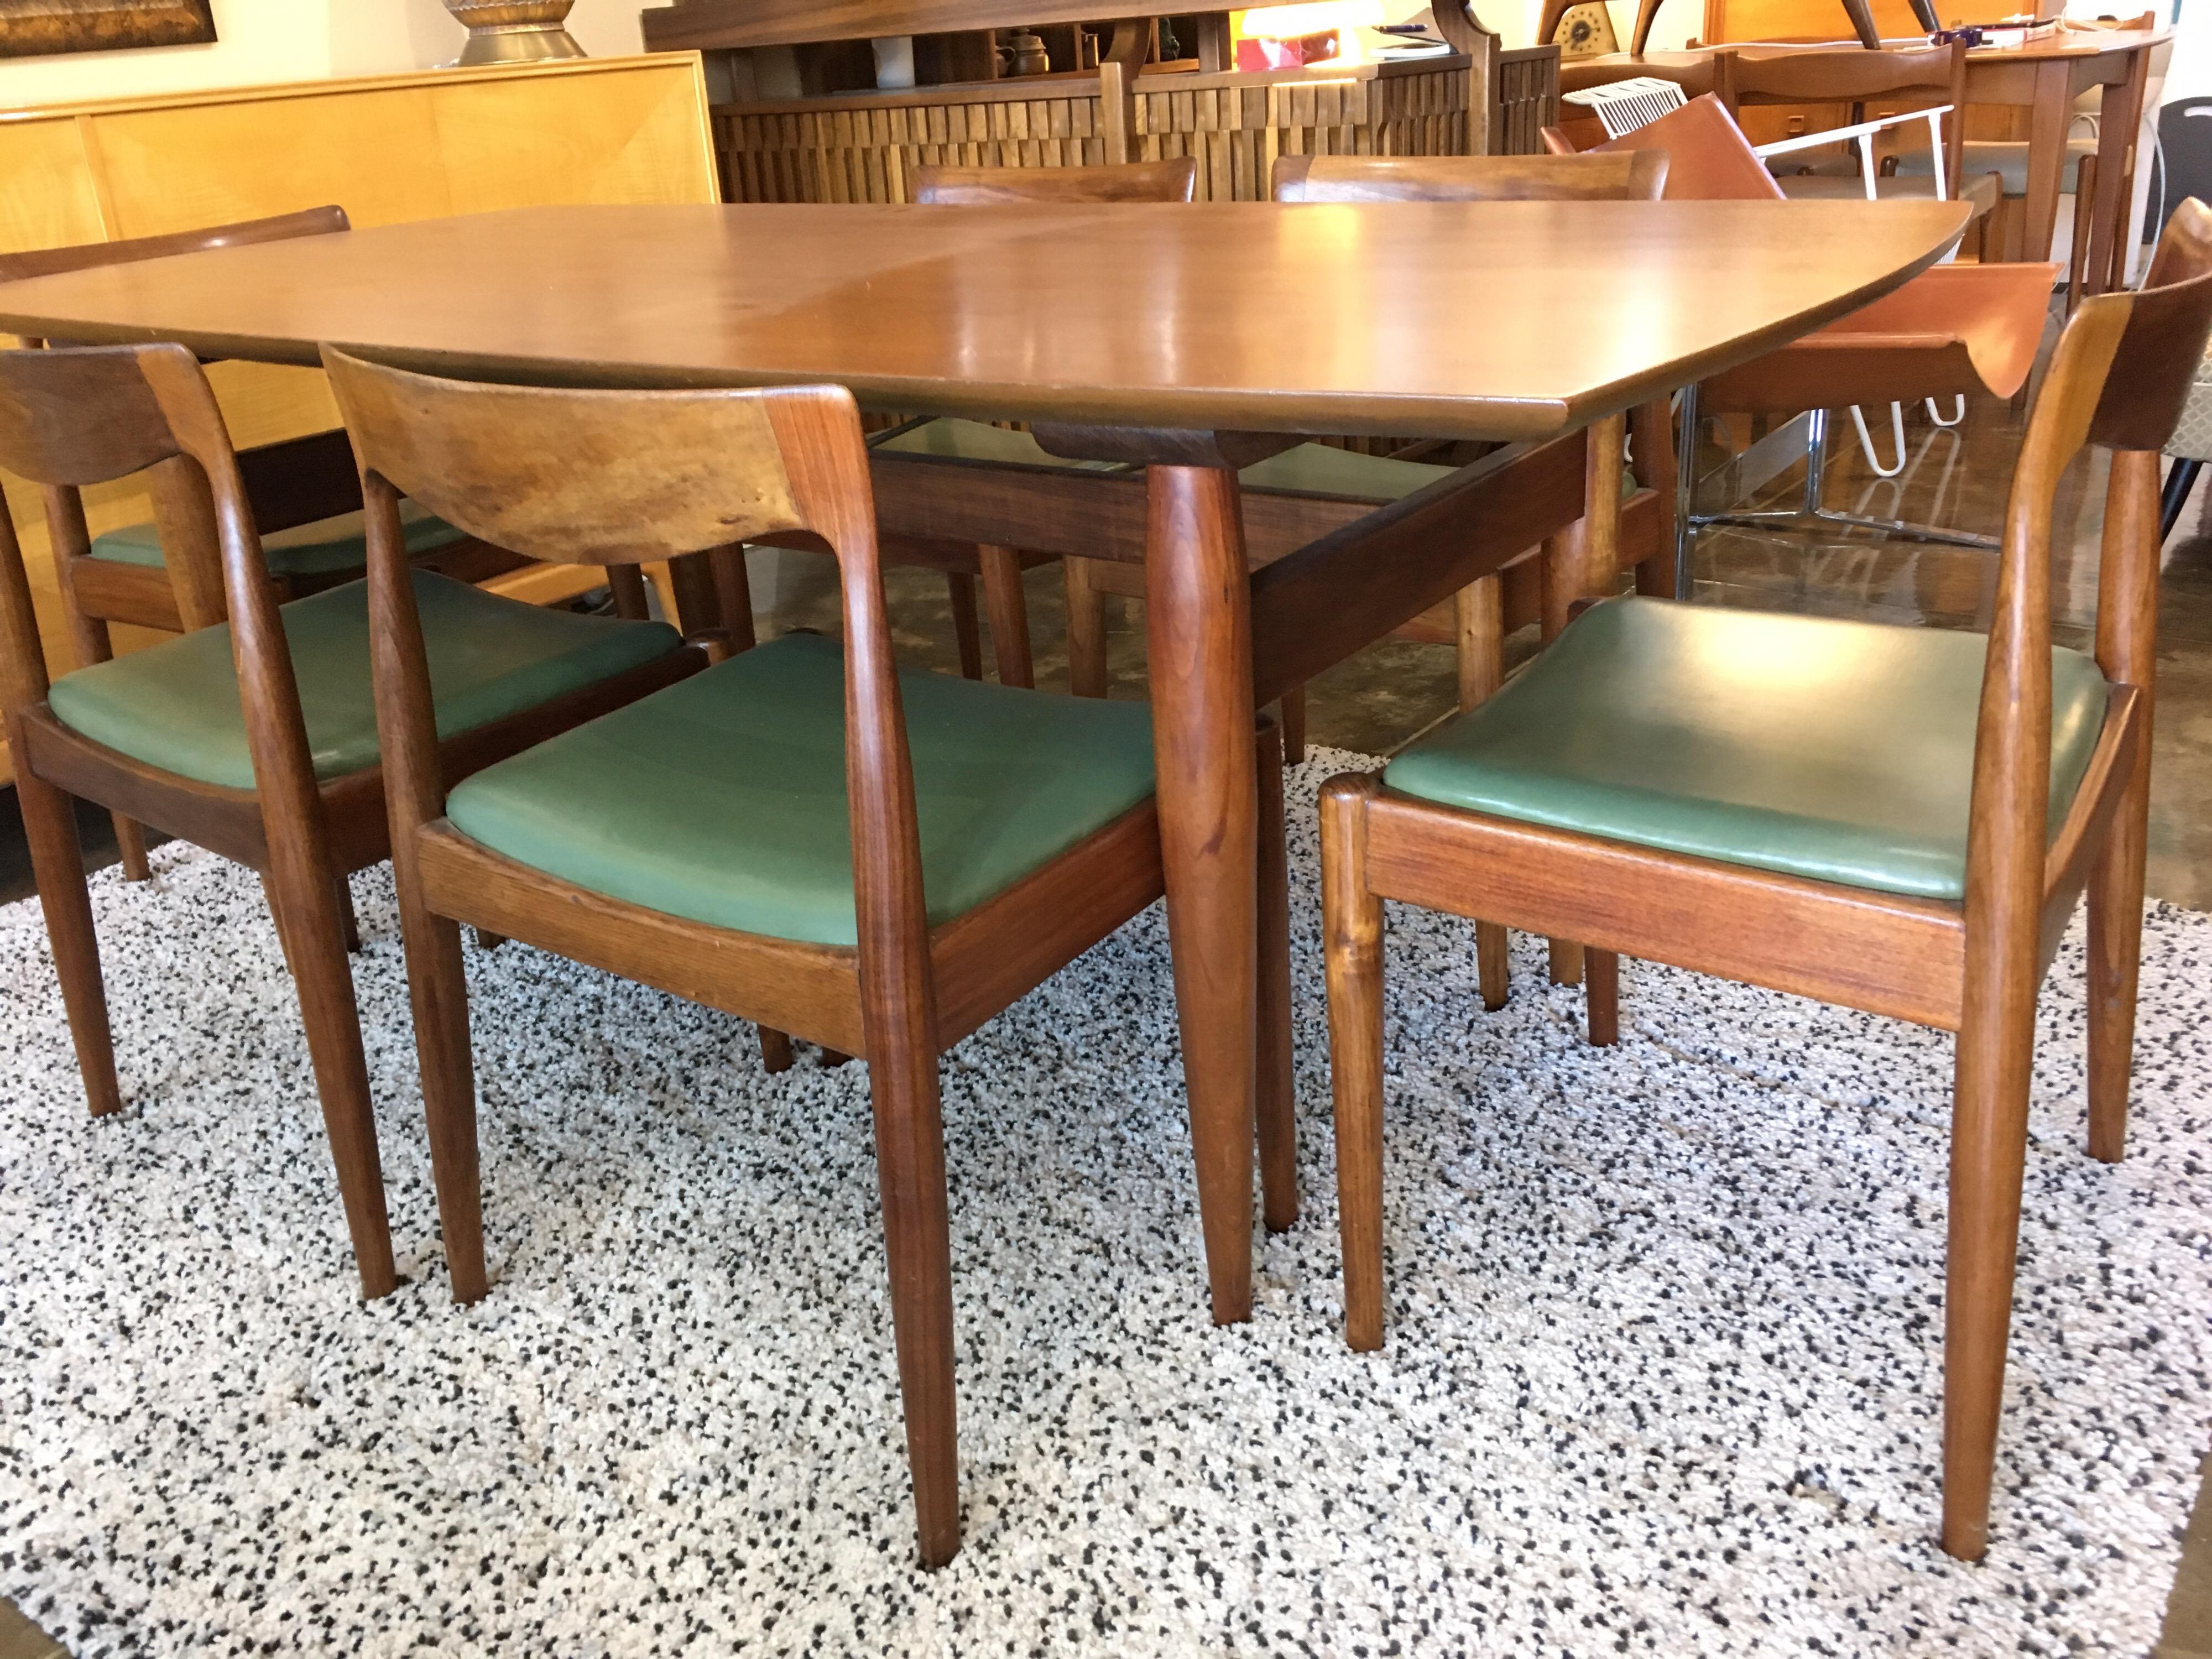 Midcentury Australian blackwood dining Suite by Danish Deluxe, circa 1960s. In exceptional original condition, comprising nicely tapered dining table and six chairs. This is the finest example of this suite available.

Table measures: 180 cm L x